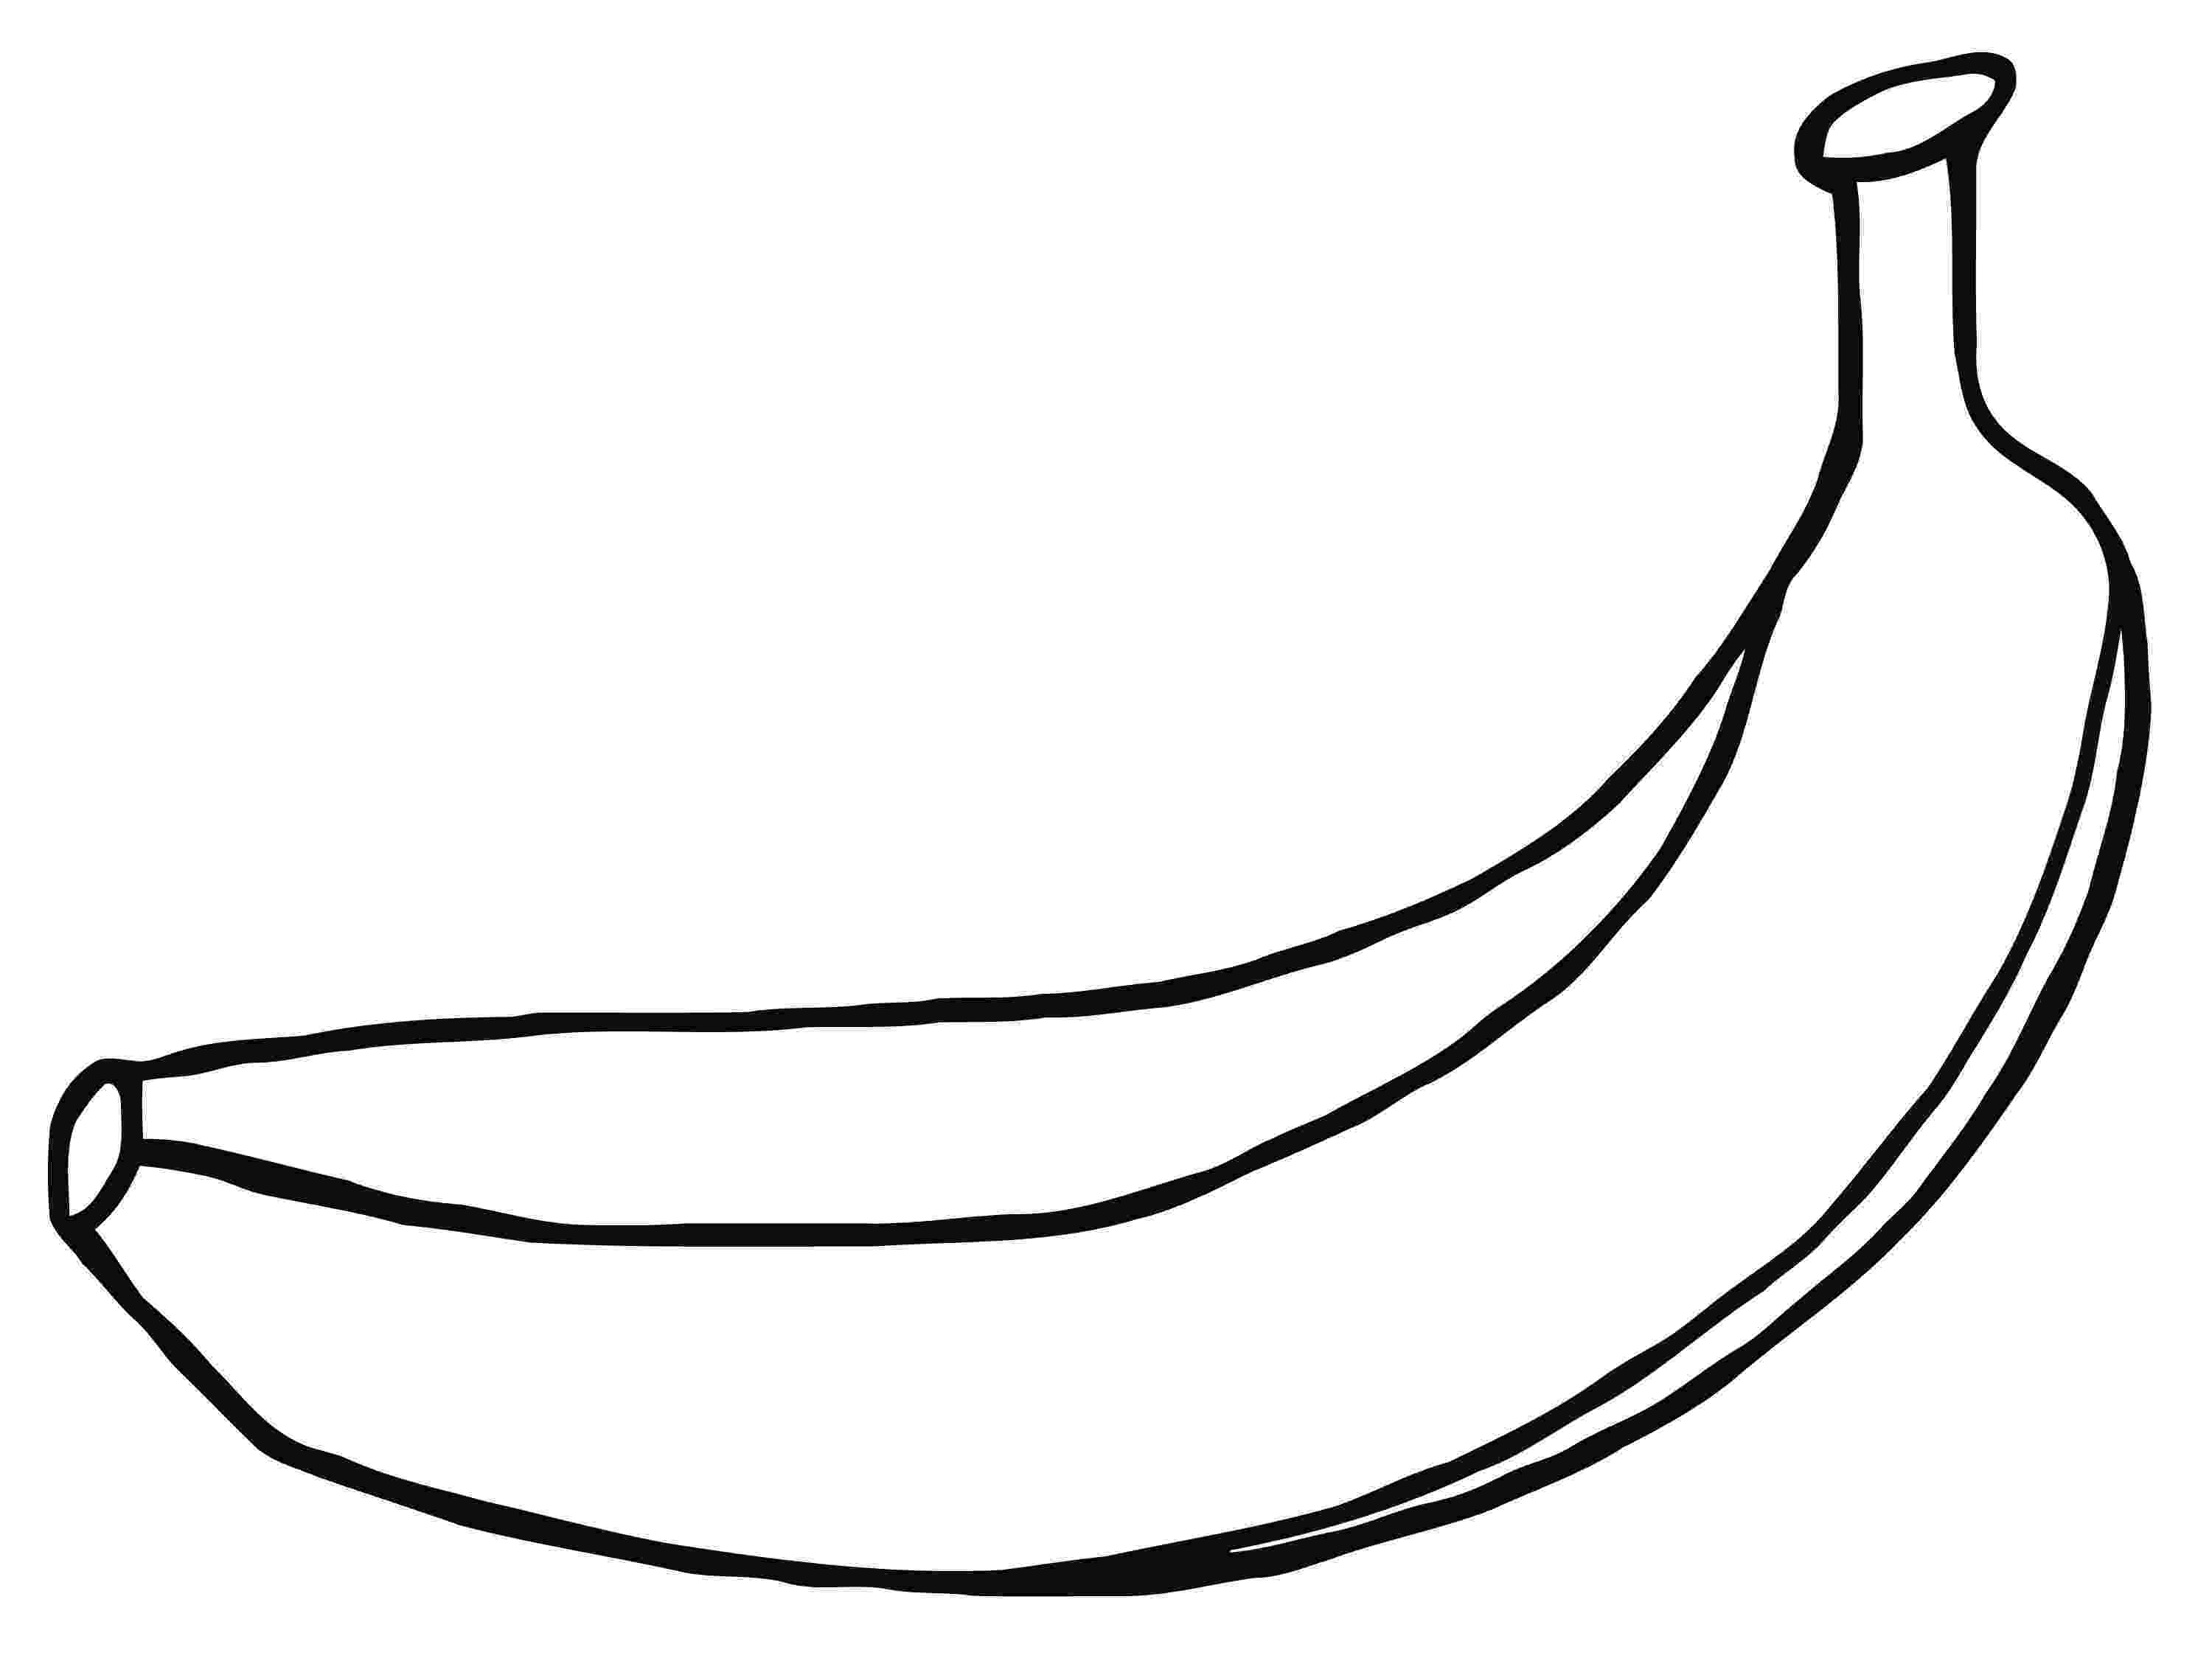 banana template apples and bananas coloring pages download and print for free banana template 